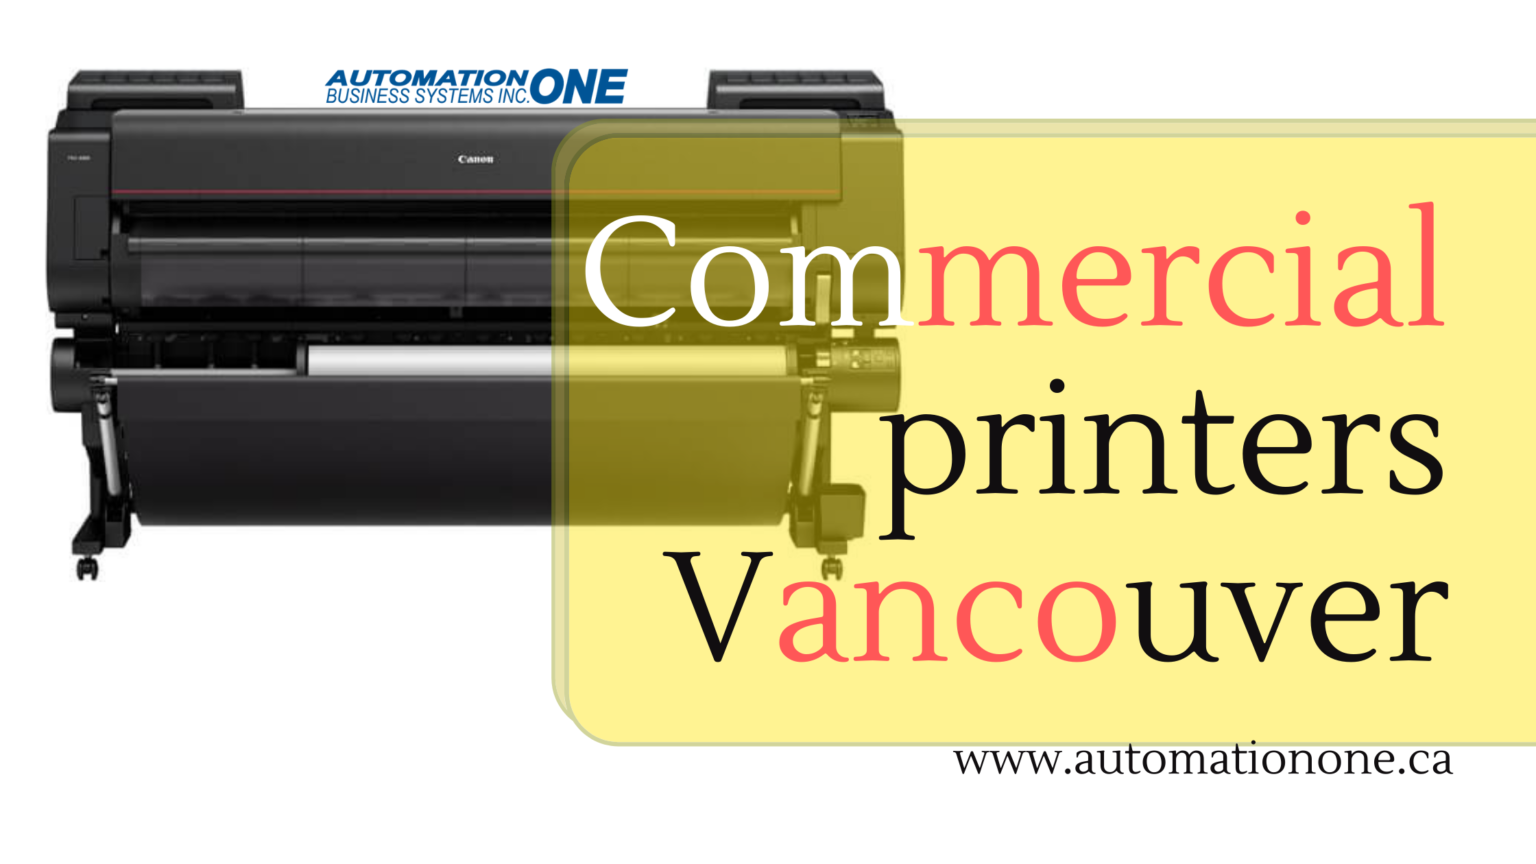 how-can-large-format-printers-benefit-your-business-automation-one